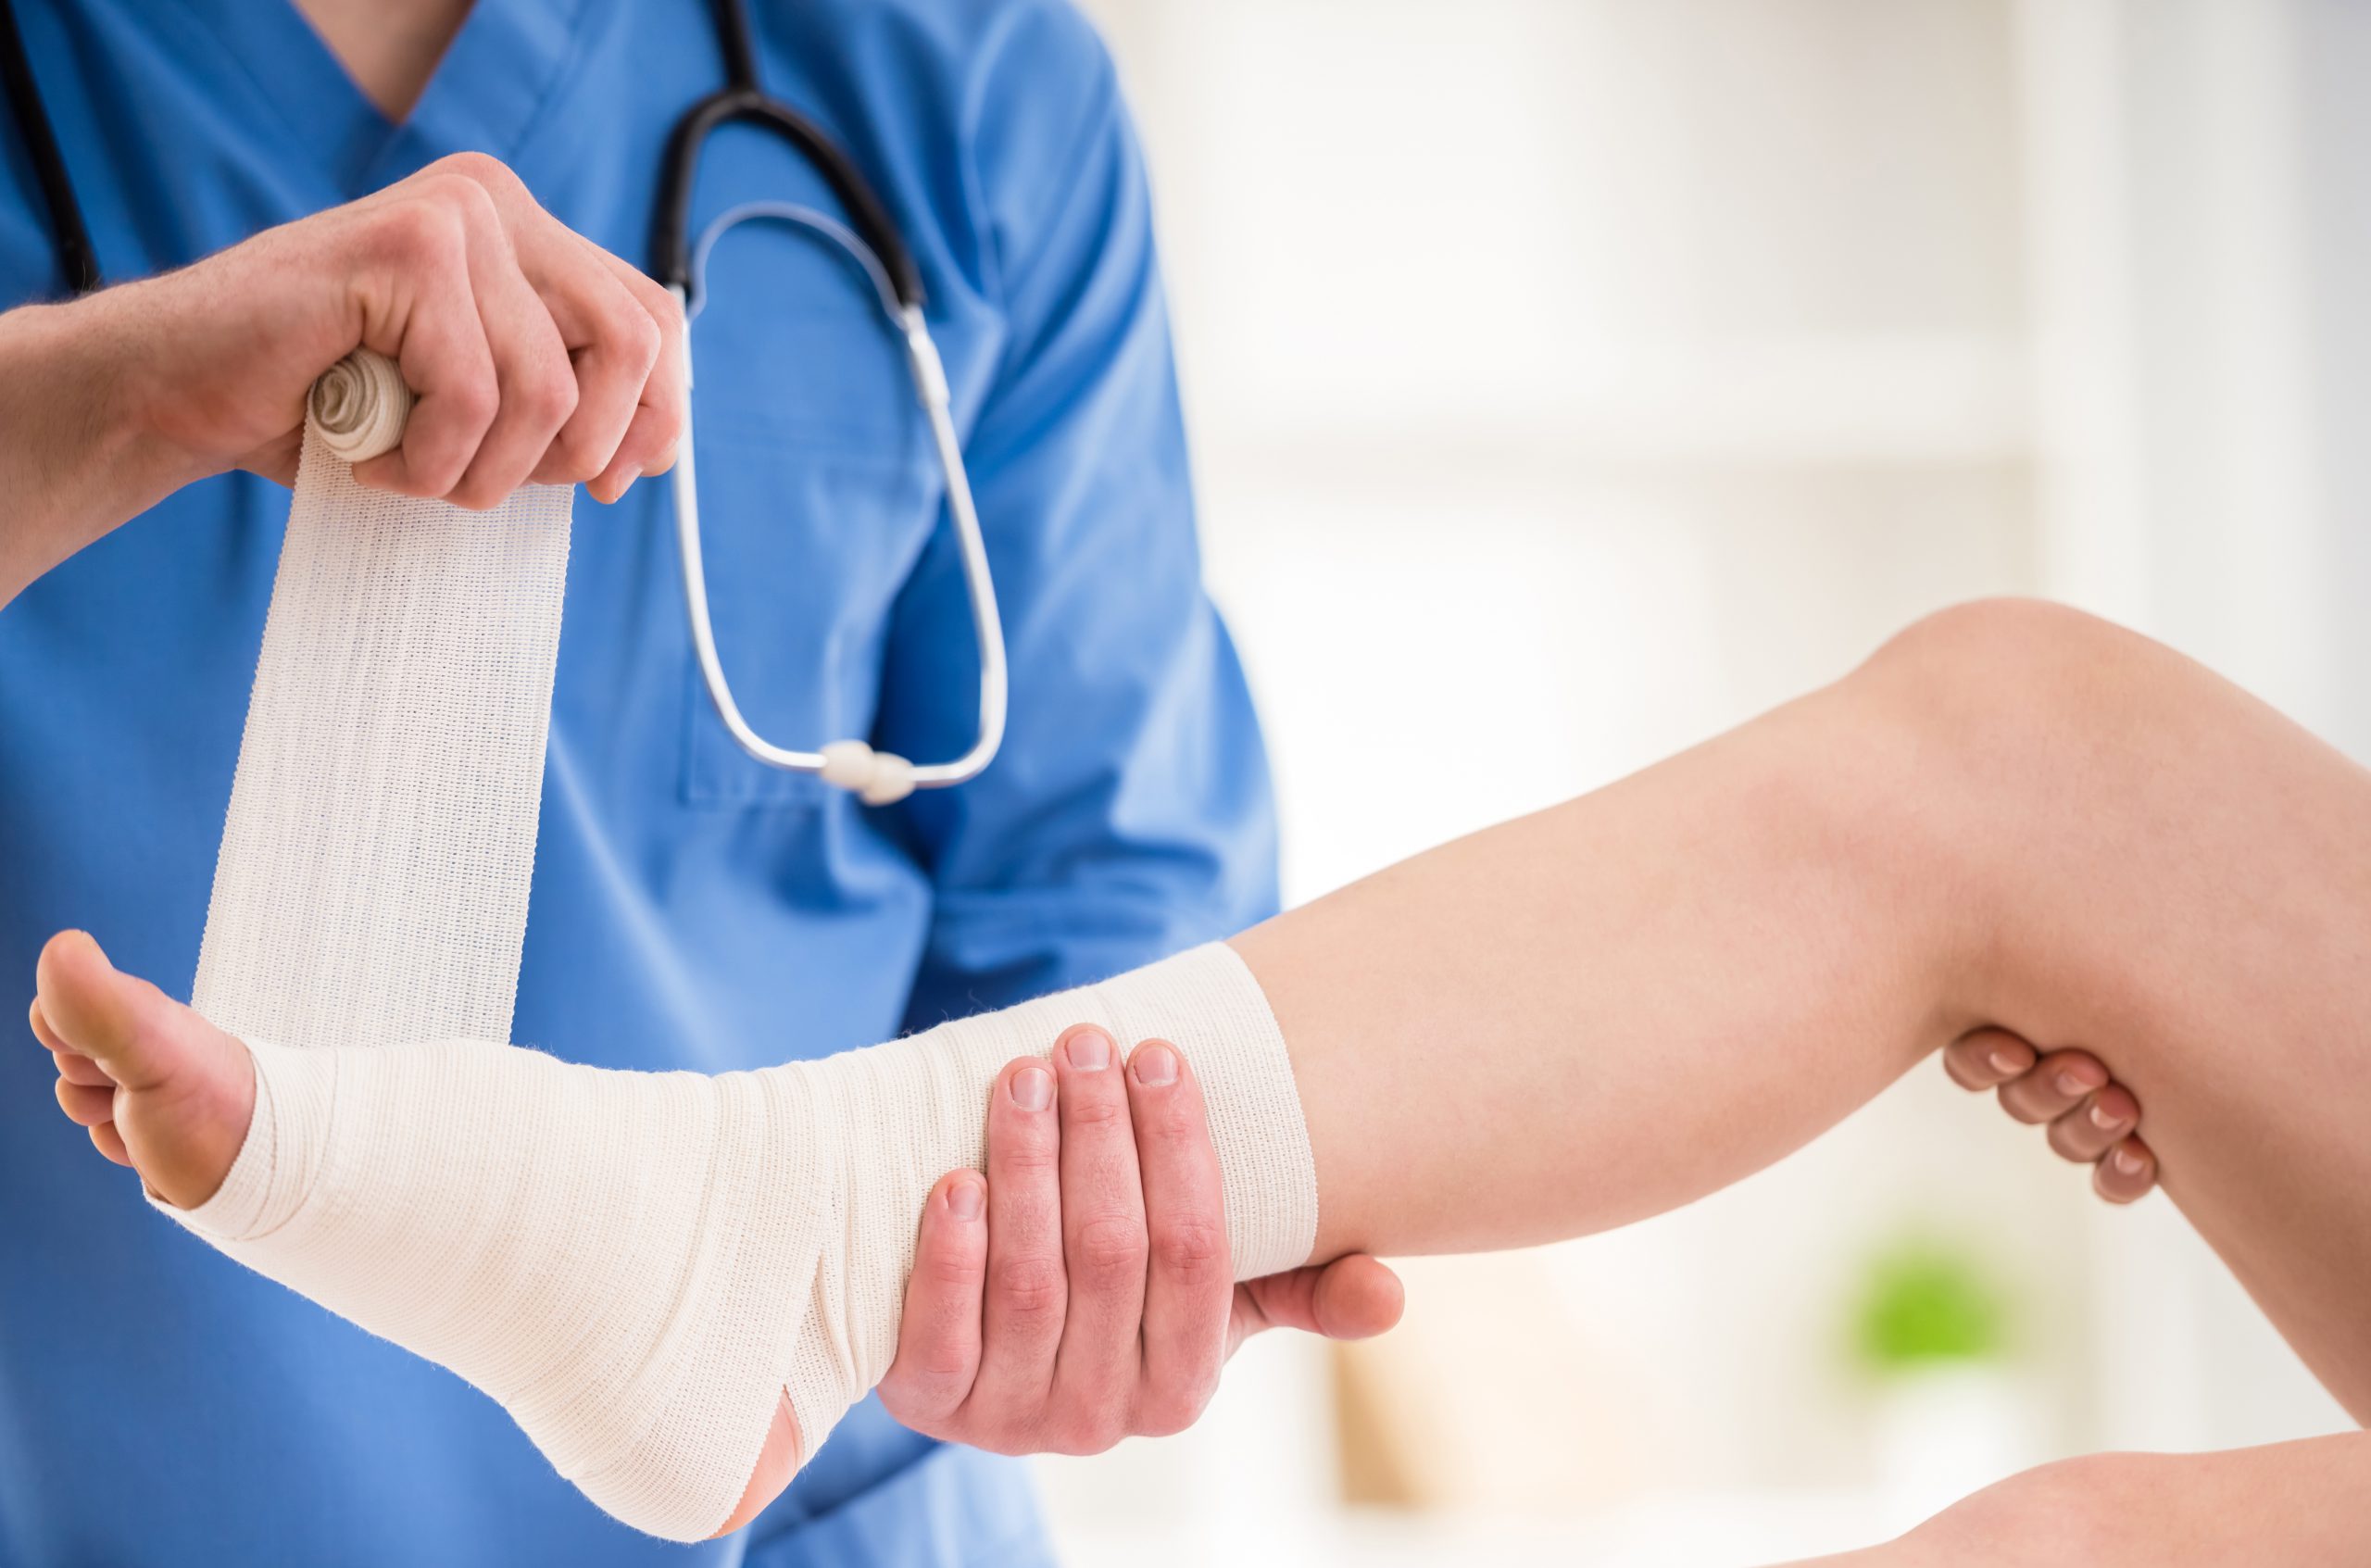 Lower Extremity Wound Care